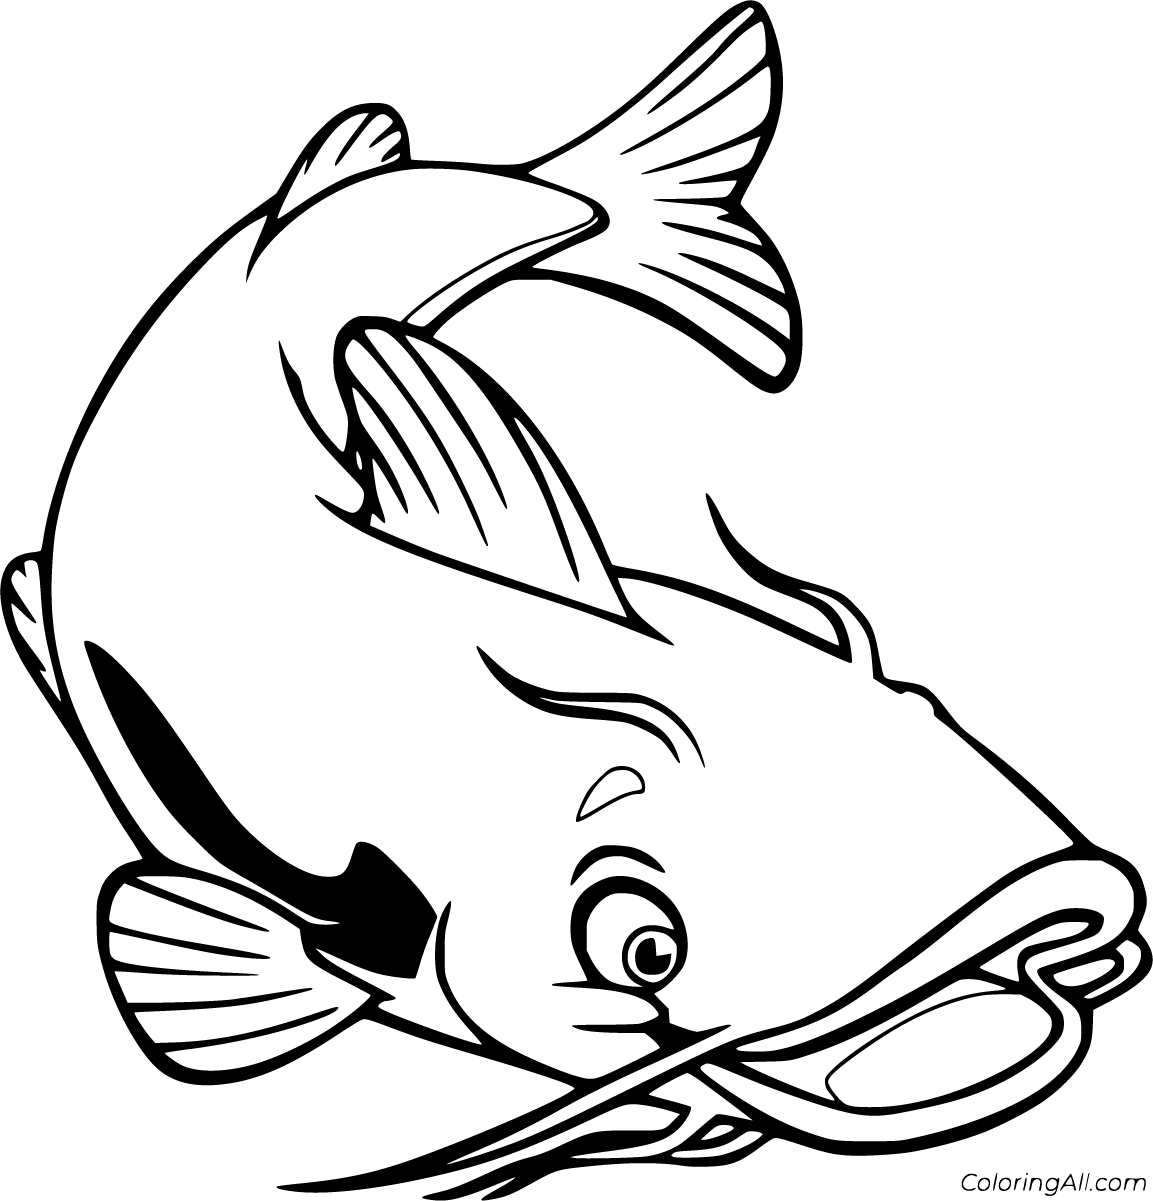 Catfish with Glasses Coloring Page